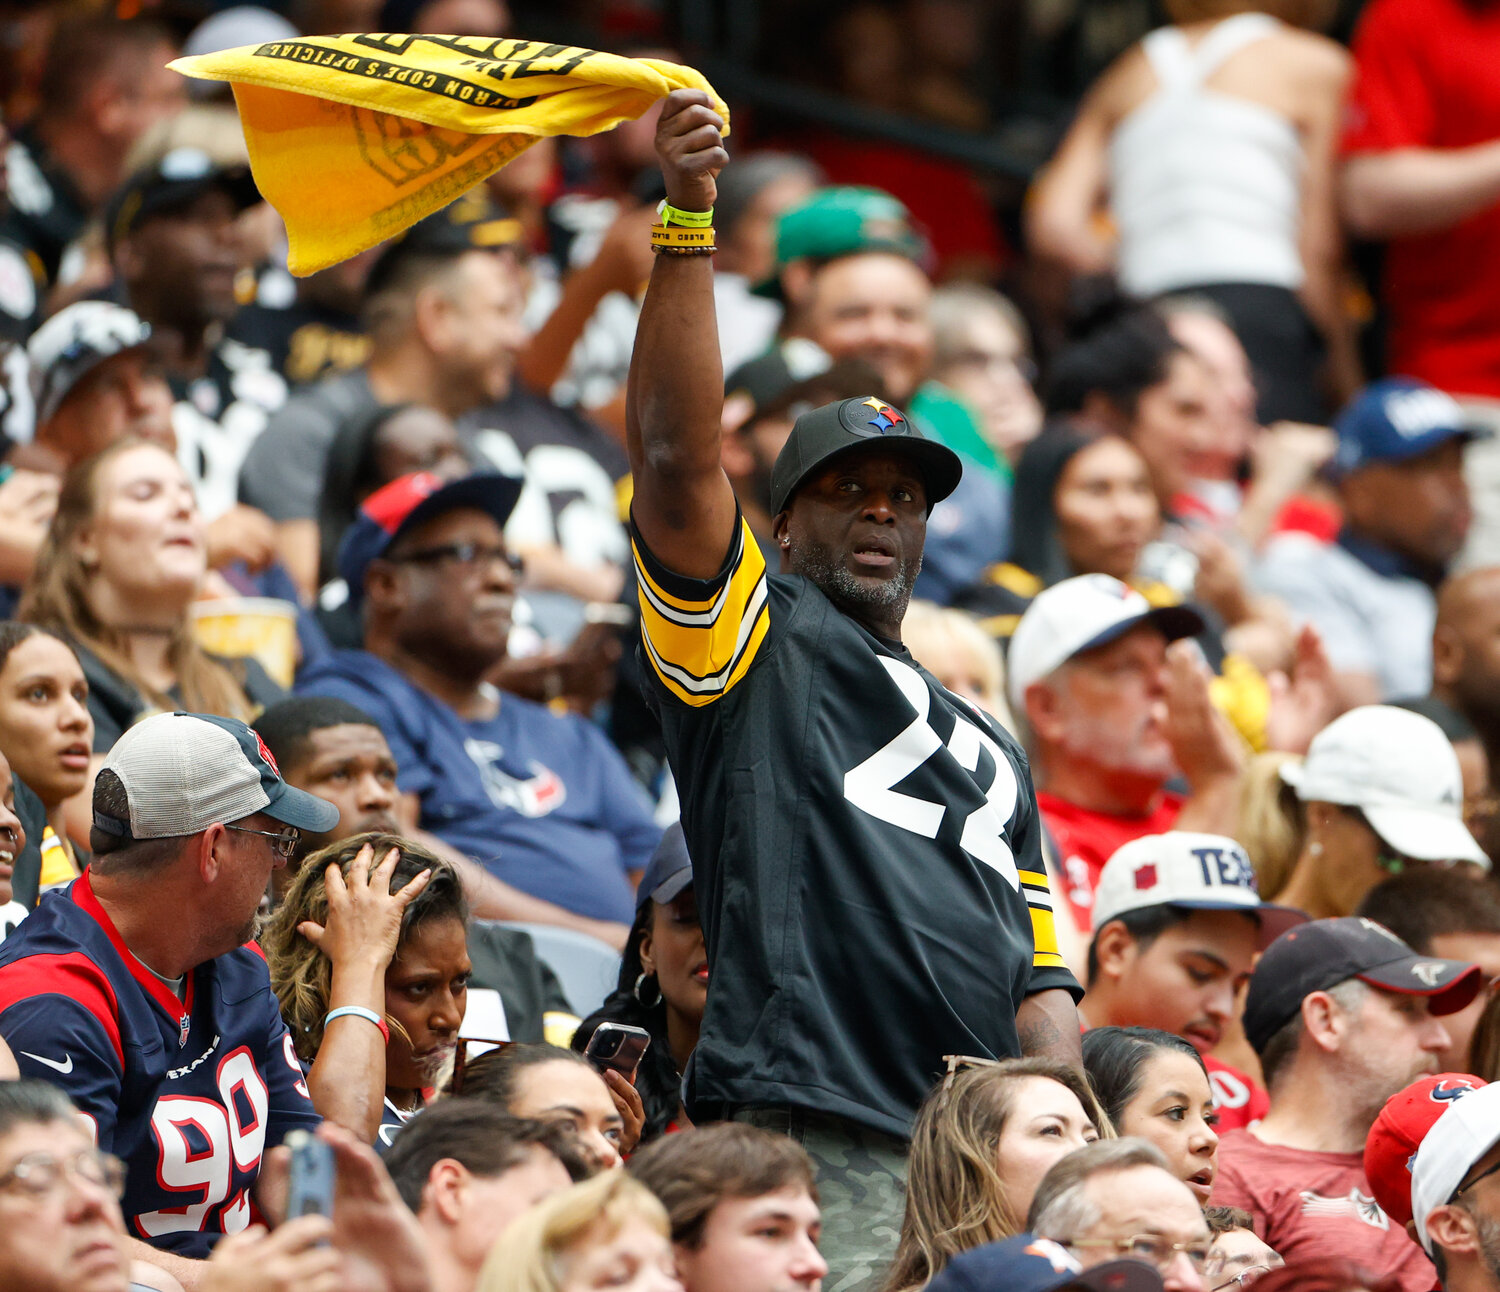 A Pittsburg Steelers fan waves his “Terrible Towel” during an NFL game between the Texans and the Steelers on October 1, 2023 in Houston.